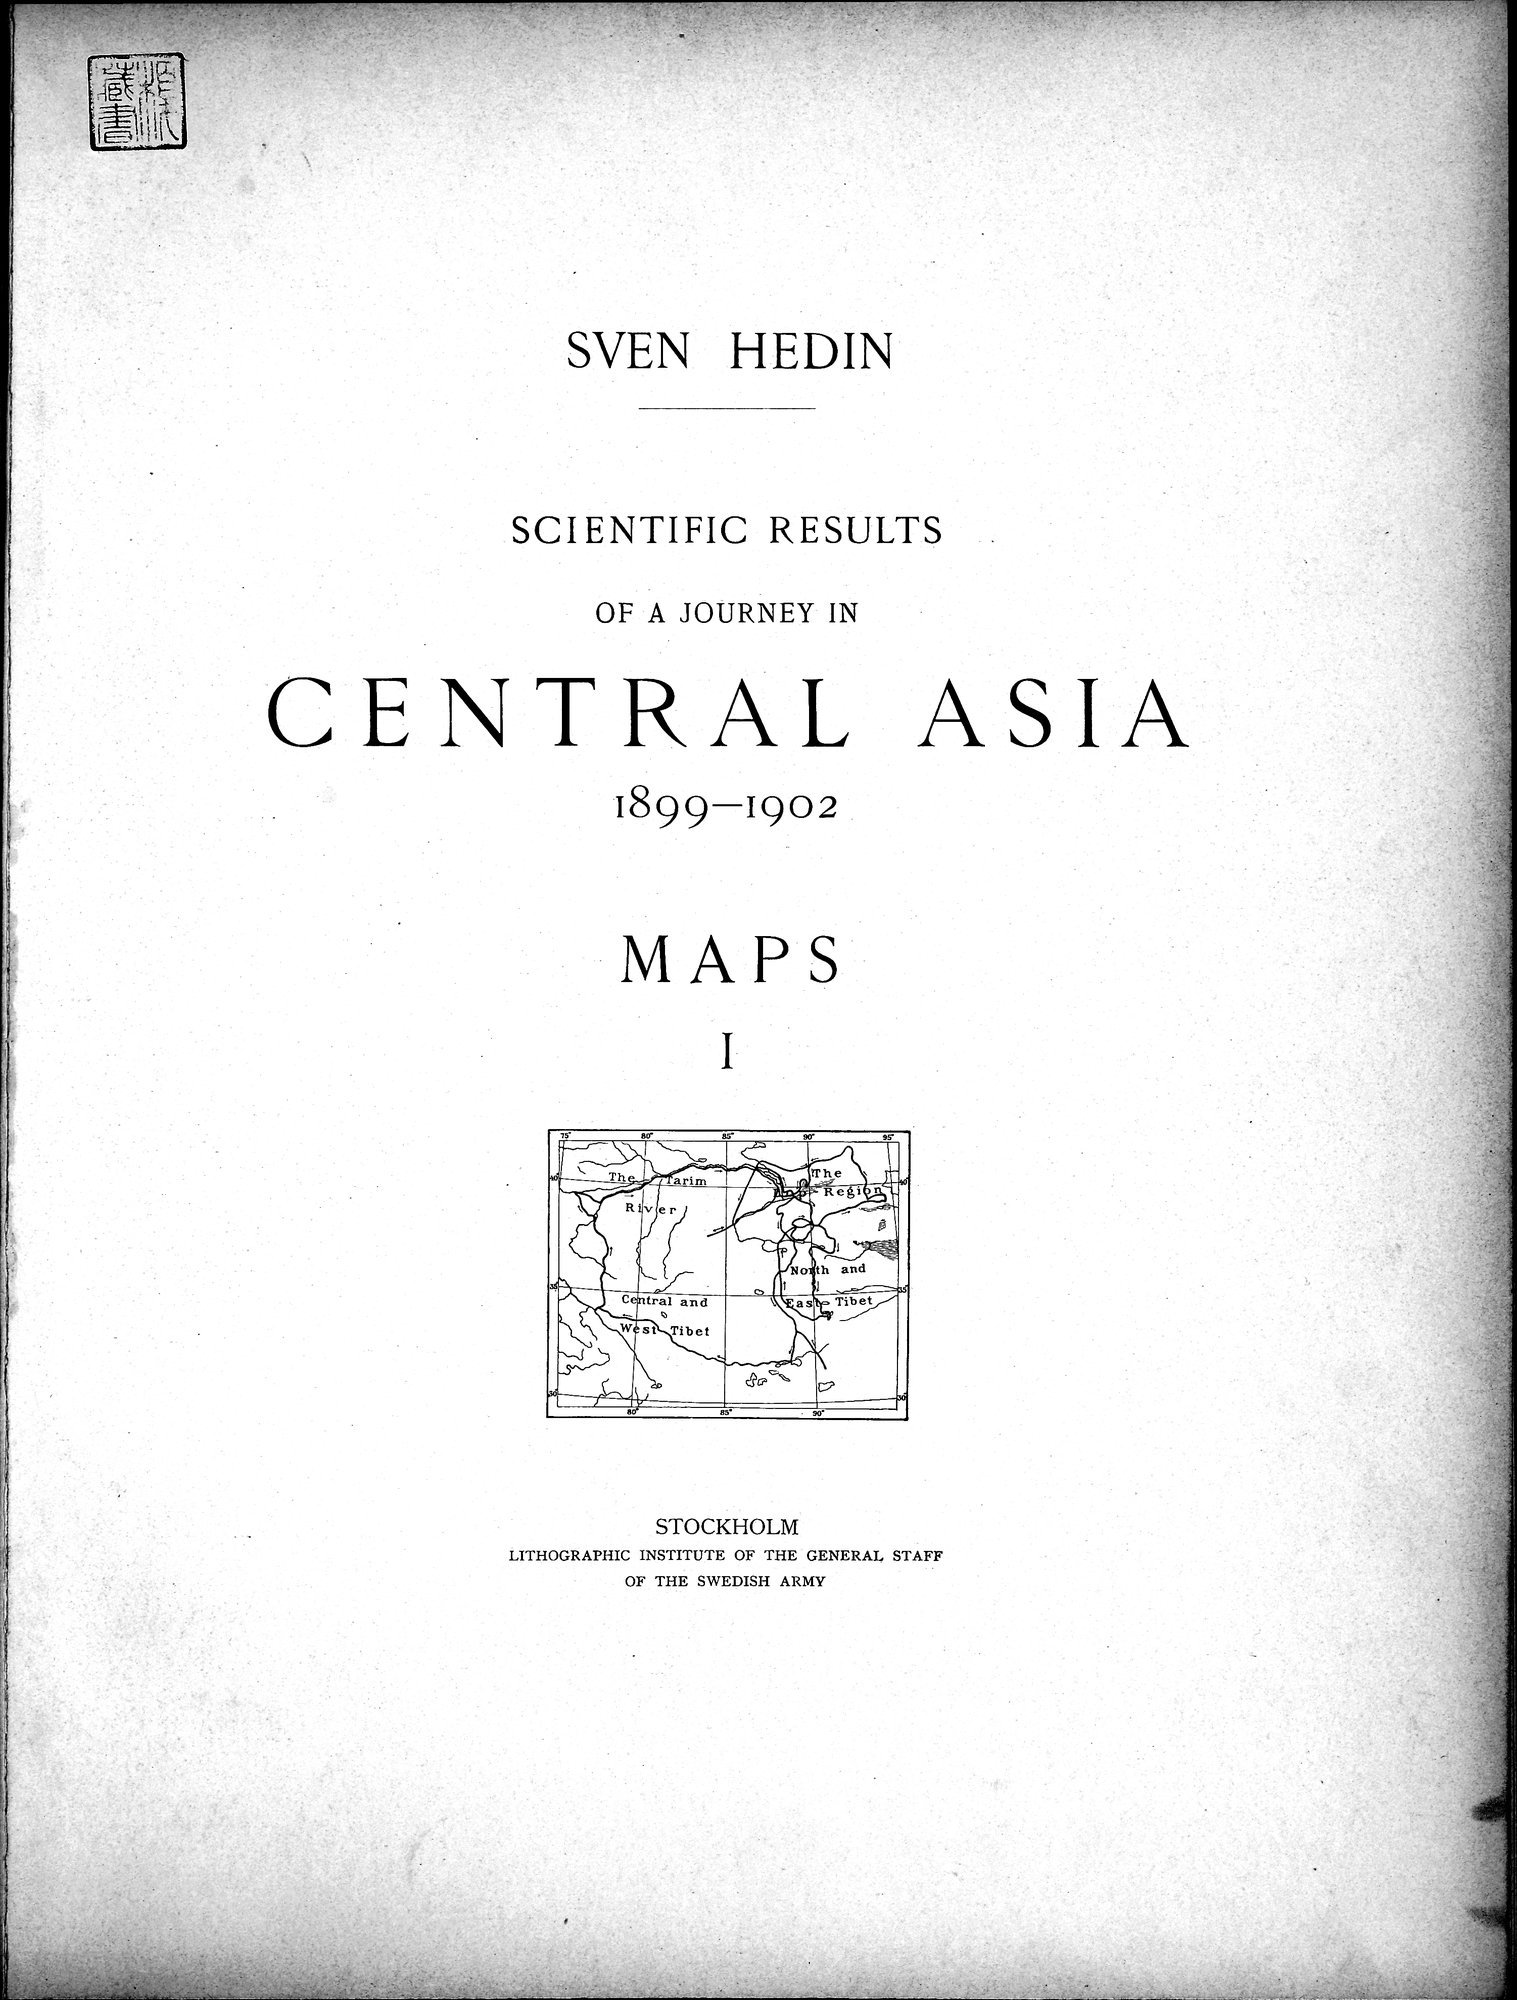 Scientific Results of a Journey in Central Asia, 1899-1902 : vol.7 / 7 ページ（白黒高解像度画像）